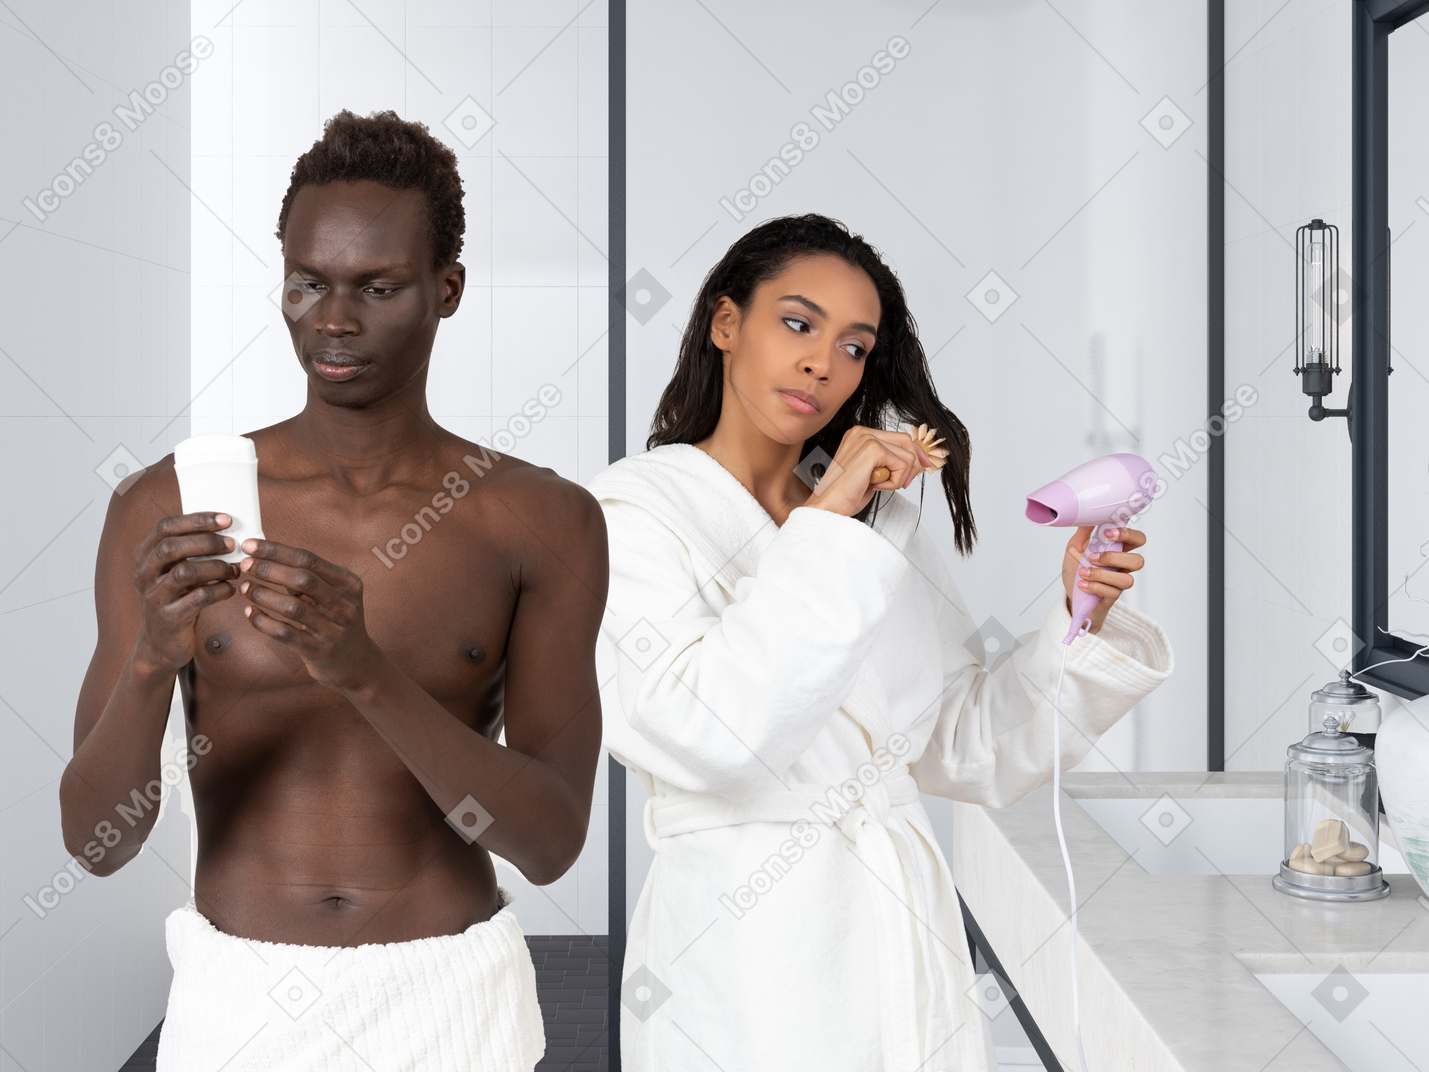 Couple getting ready in the bathroom